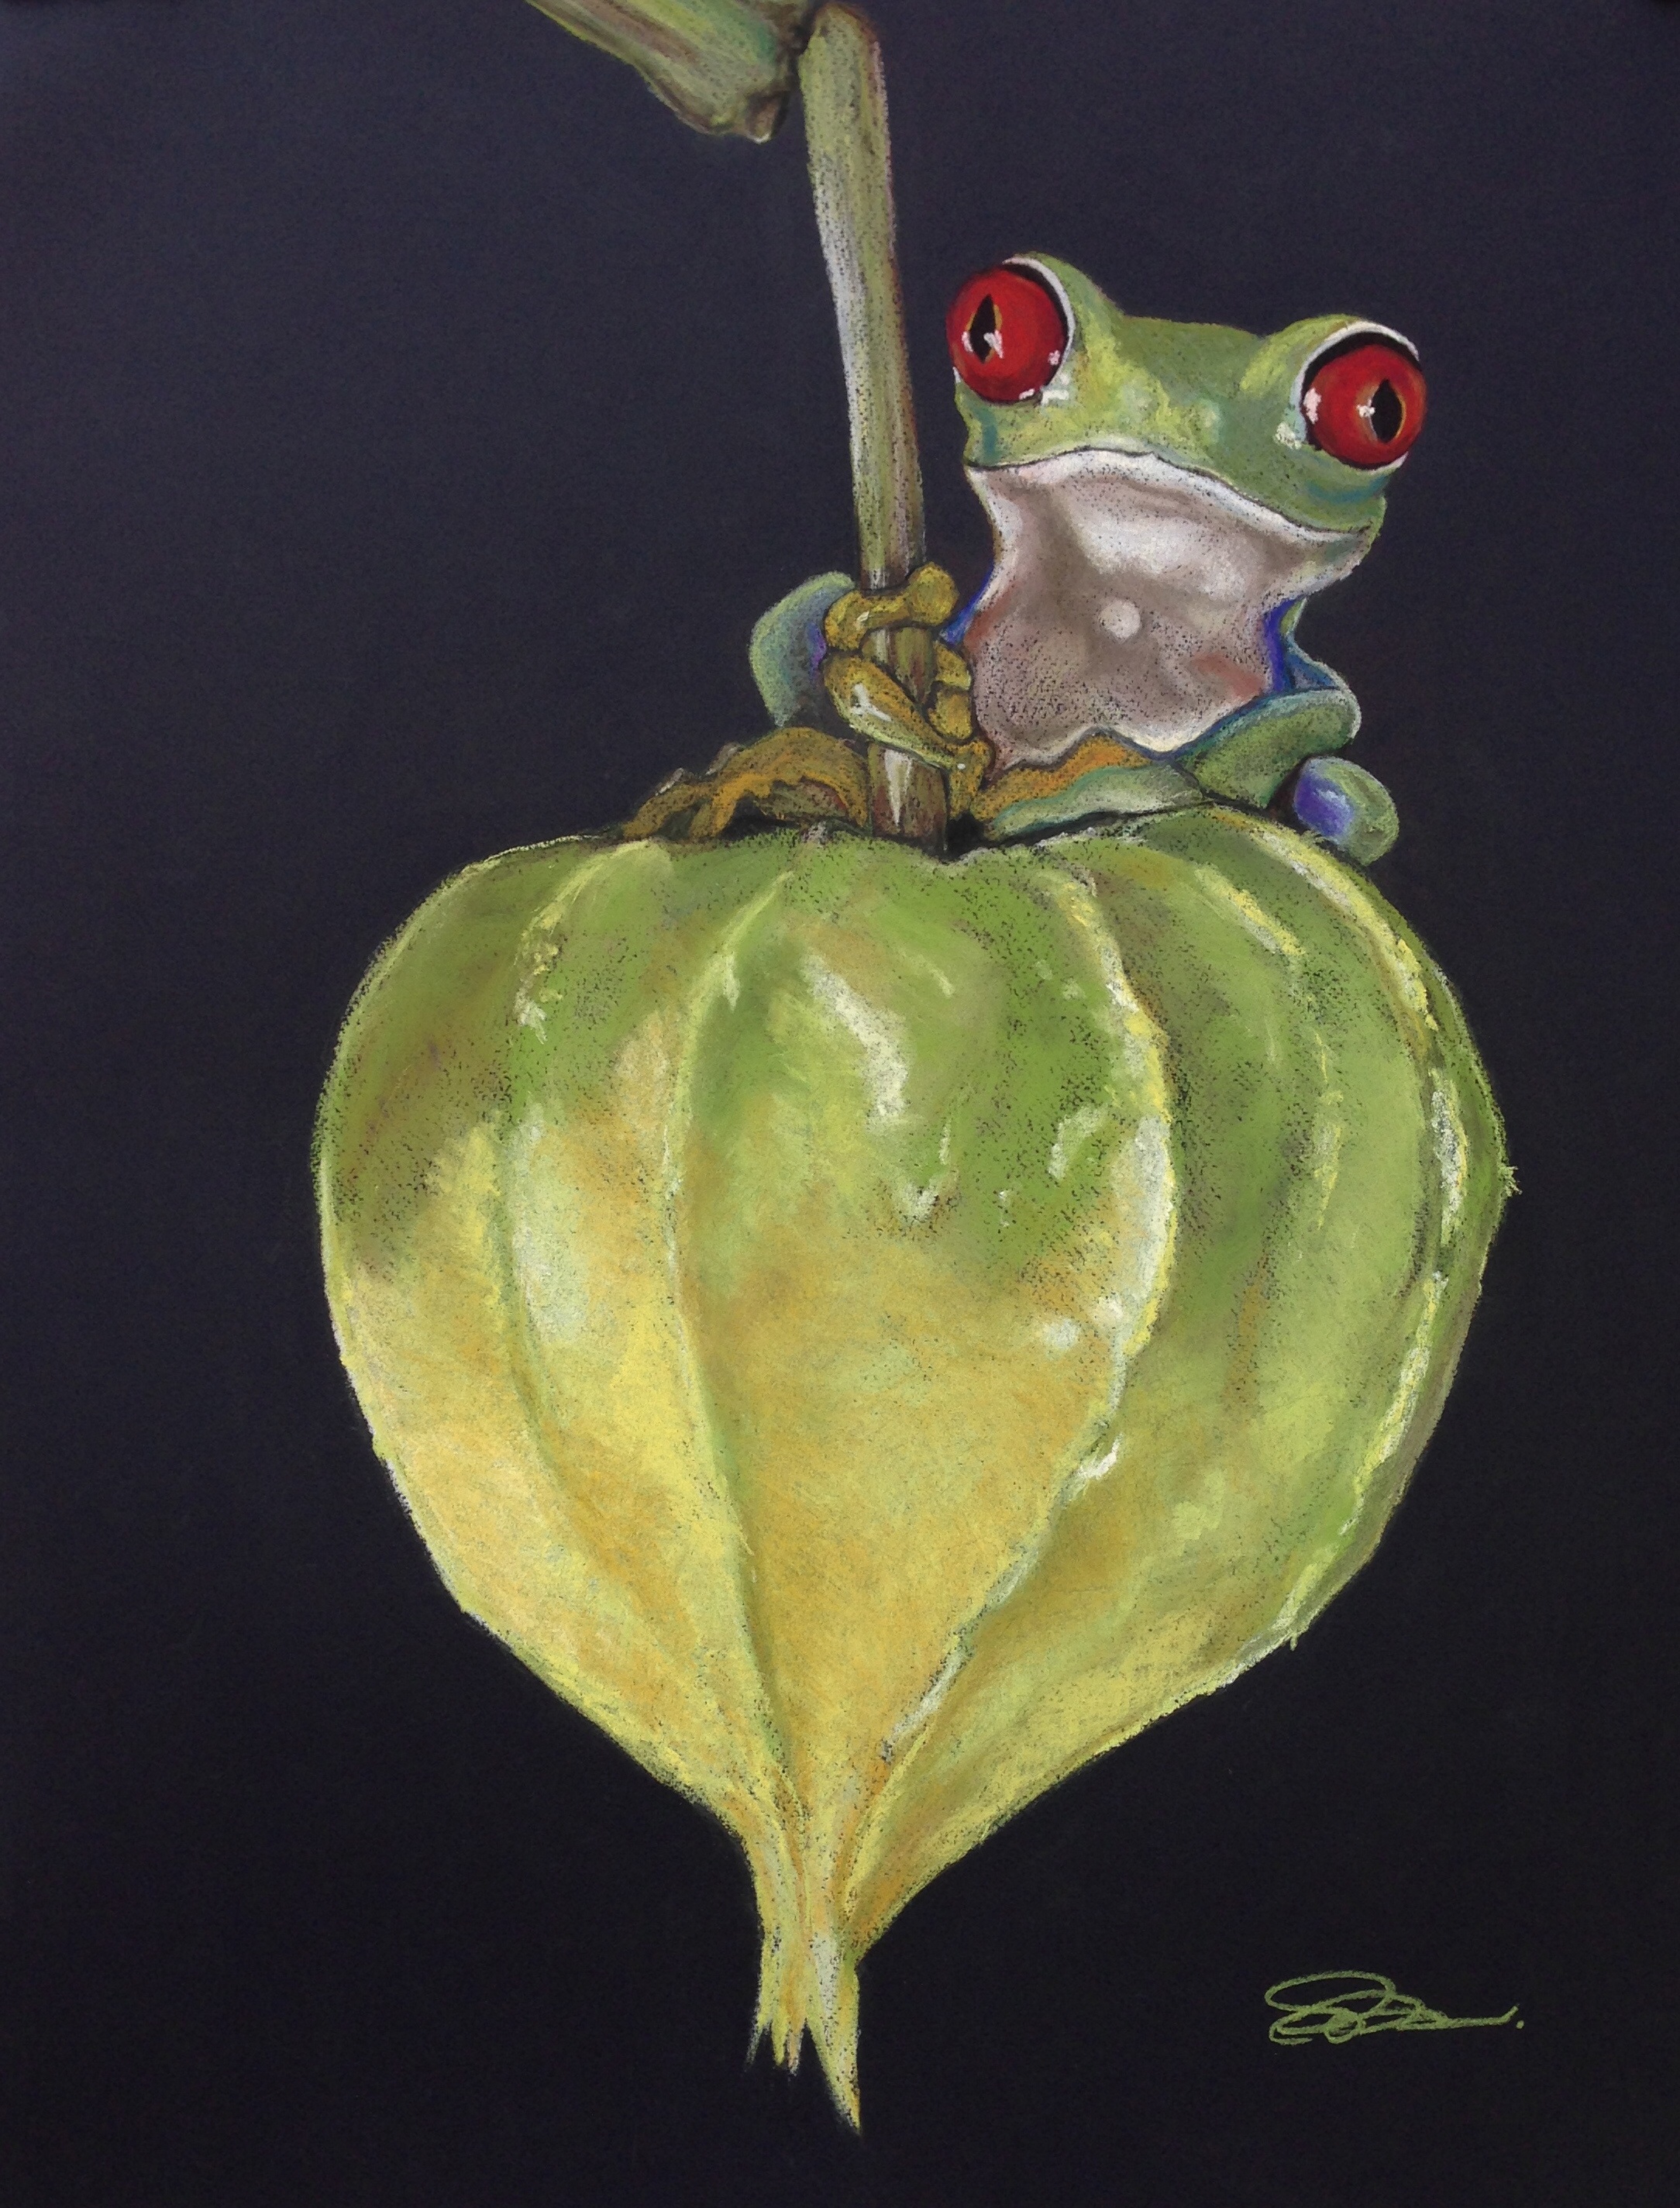 Red-eyed Tree Frog on Seed Pod